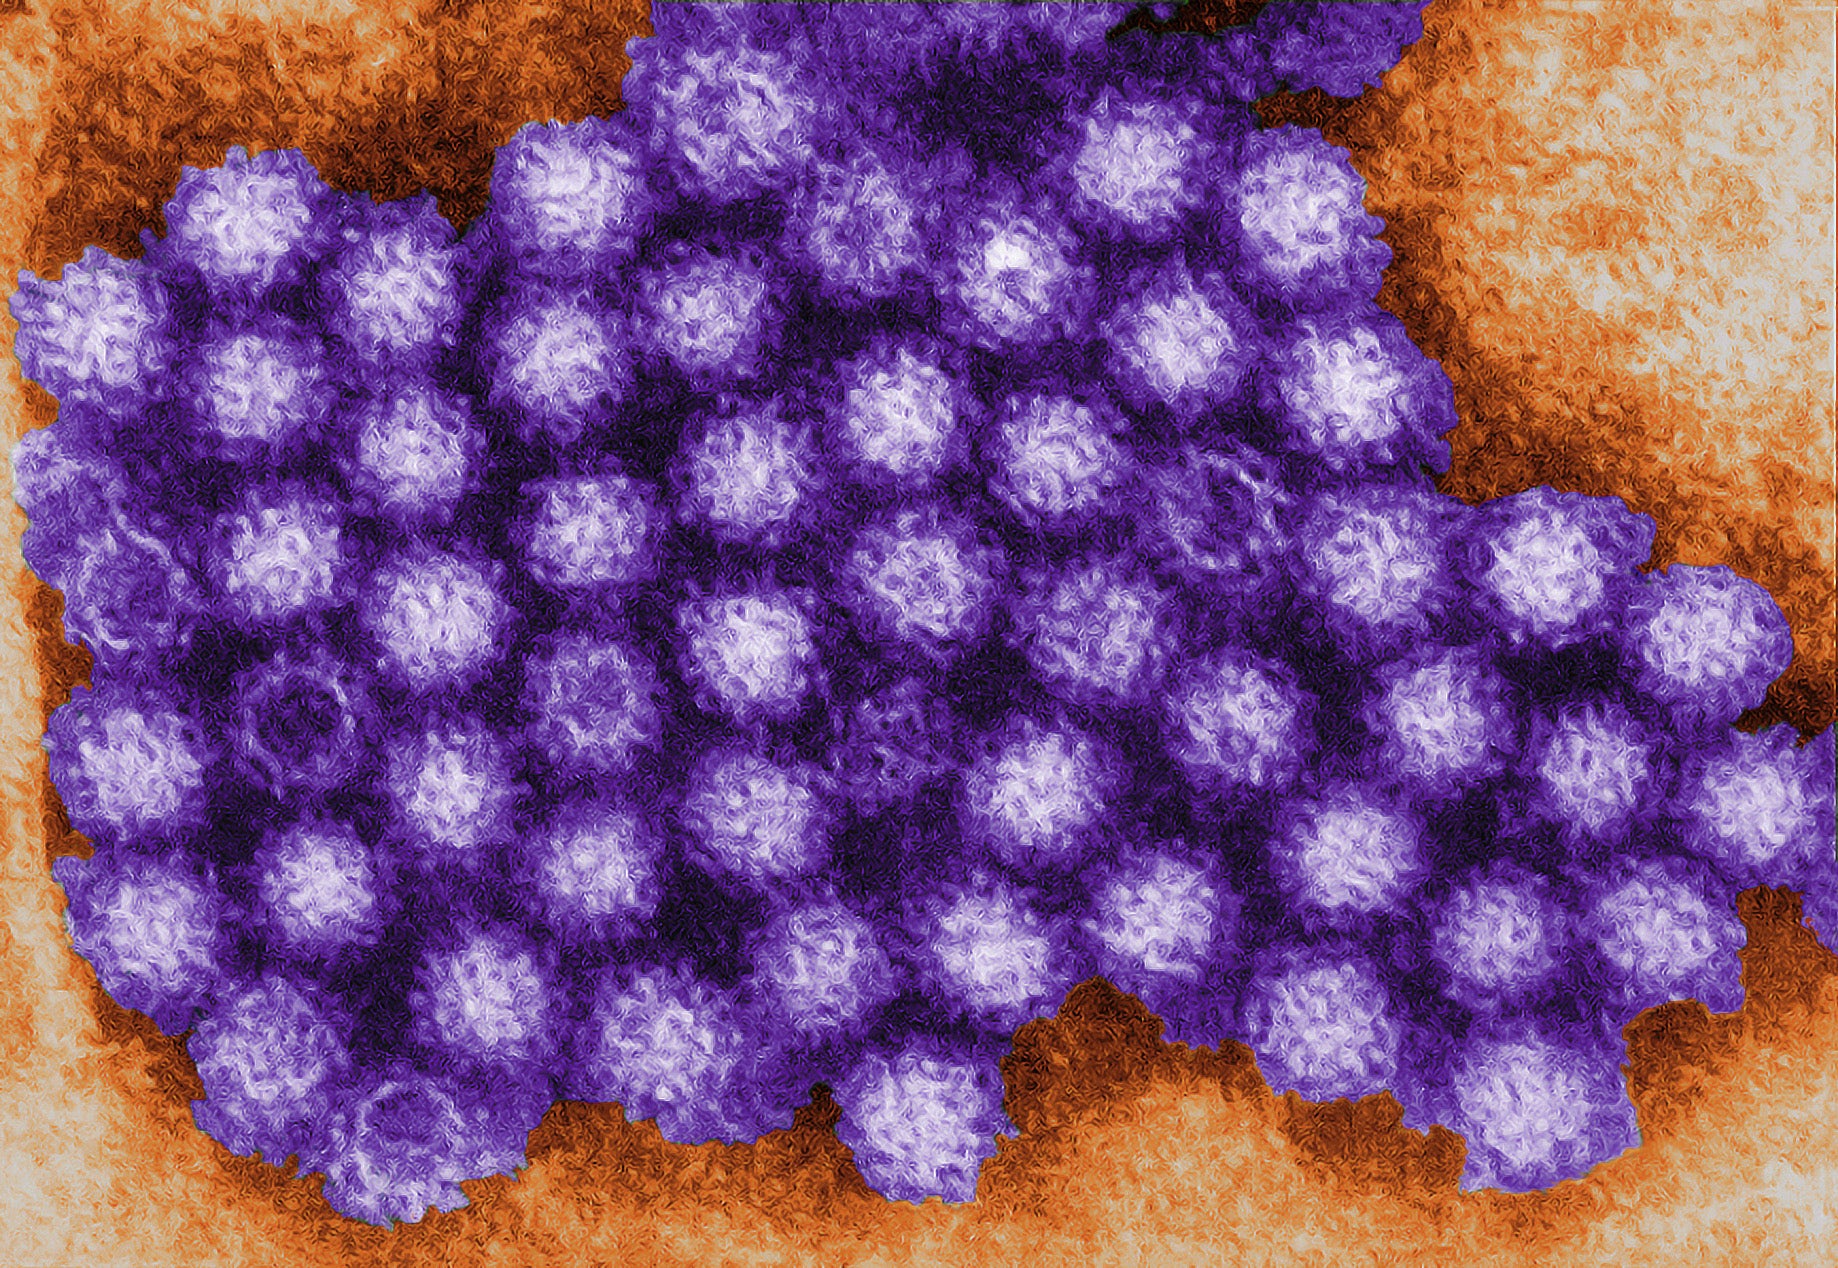 Forget COVID; CDC now warns this virus is highly contagious